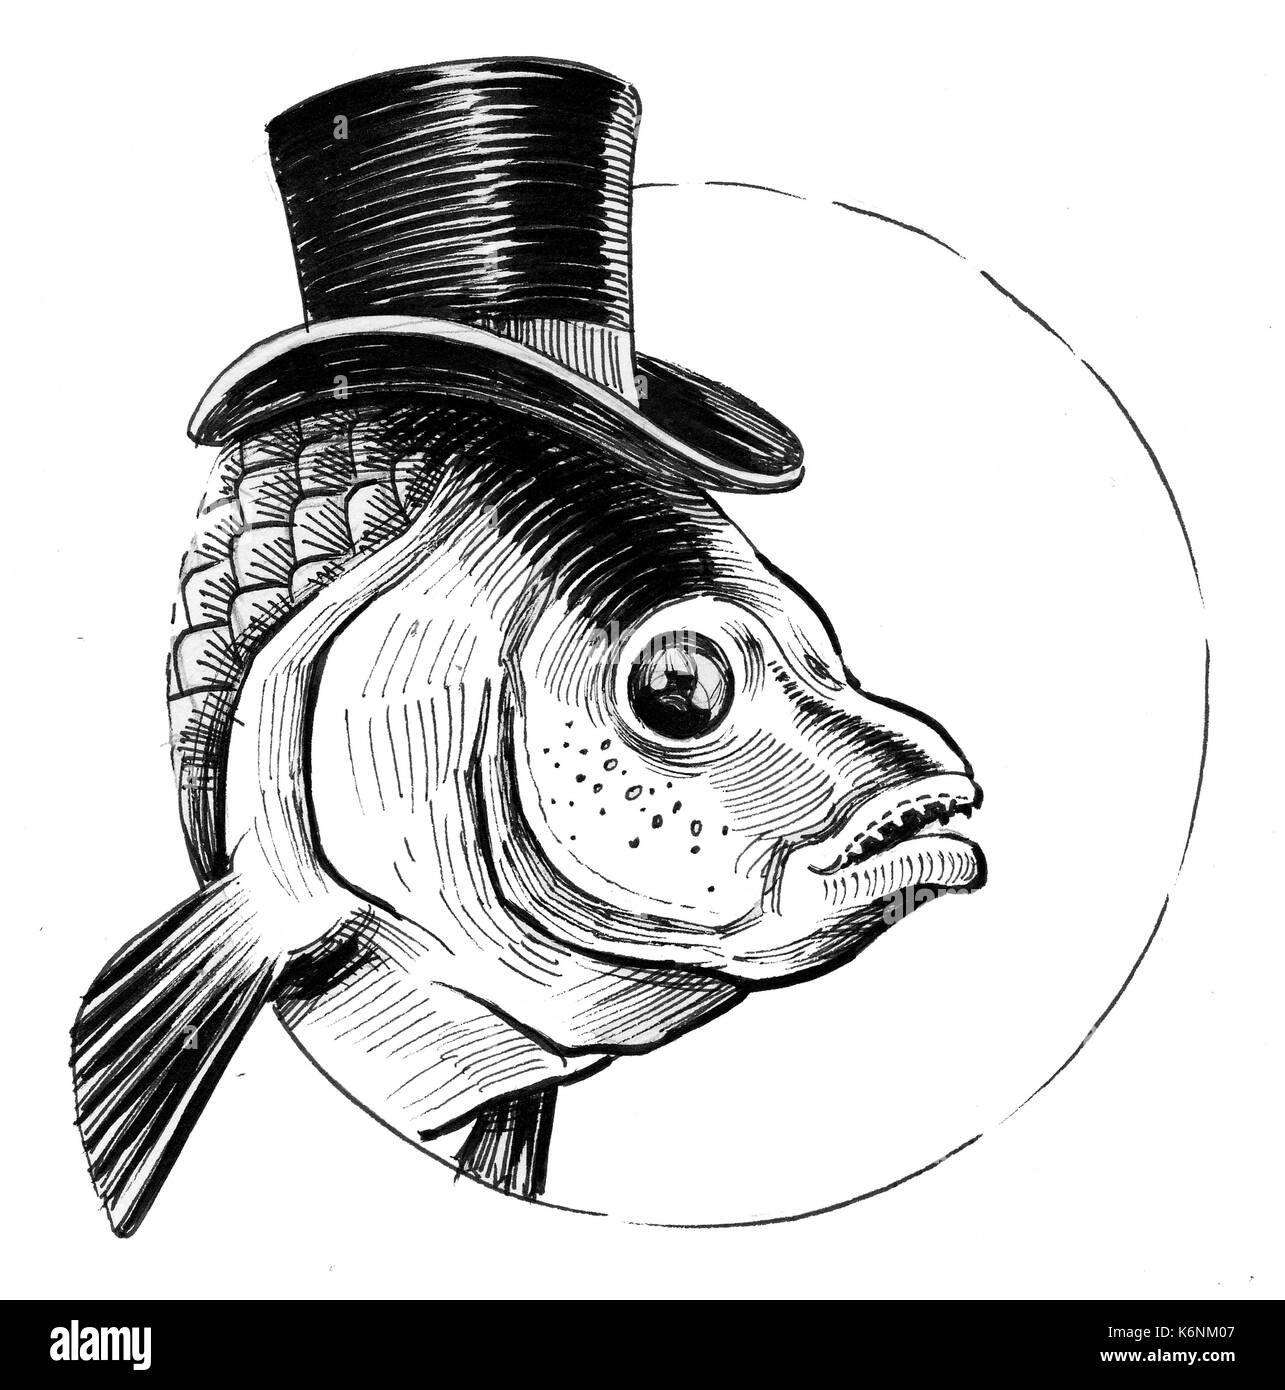 Hat fish head Cut Out Stock Images & Pictures - Alamy